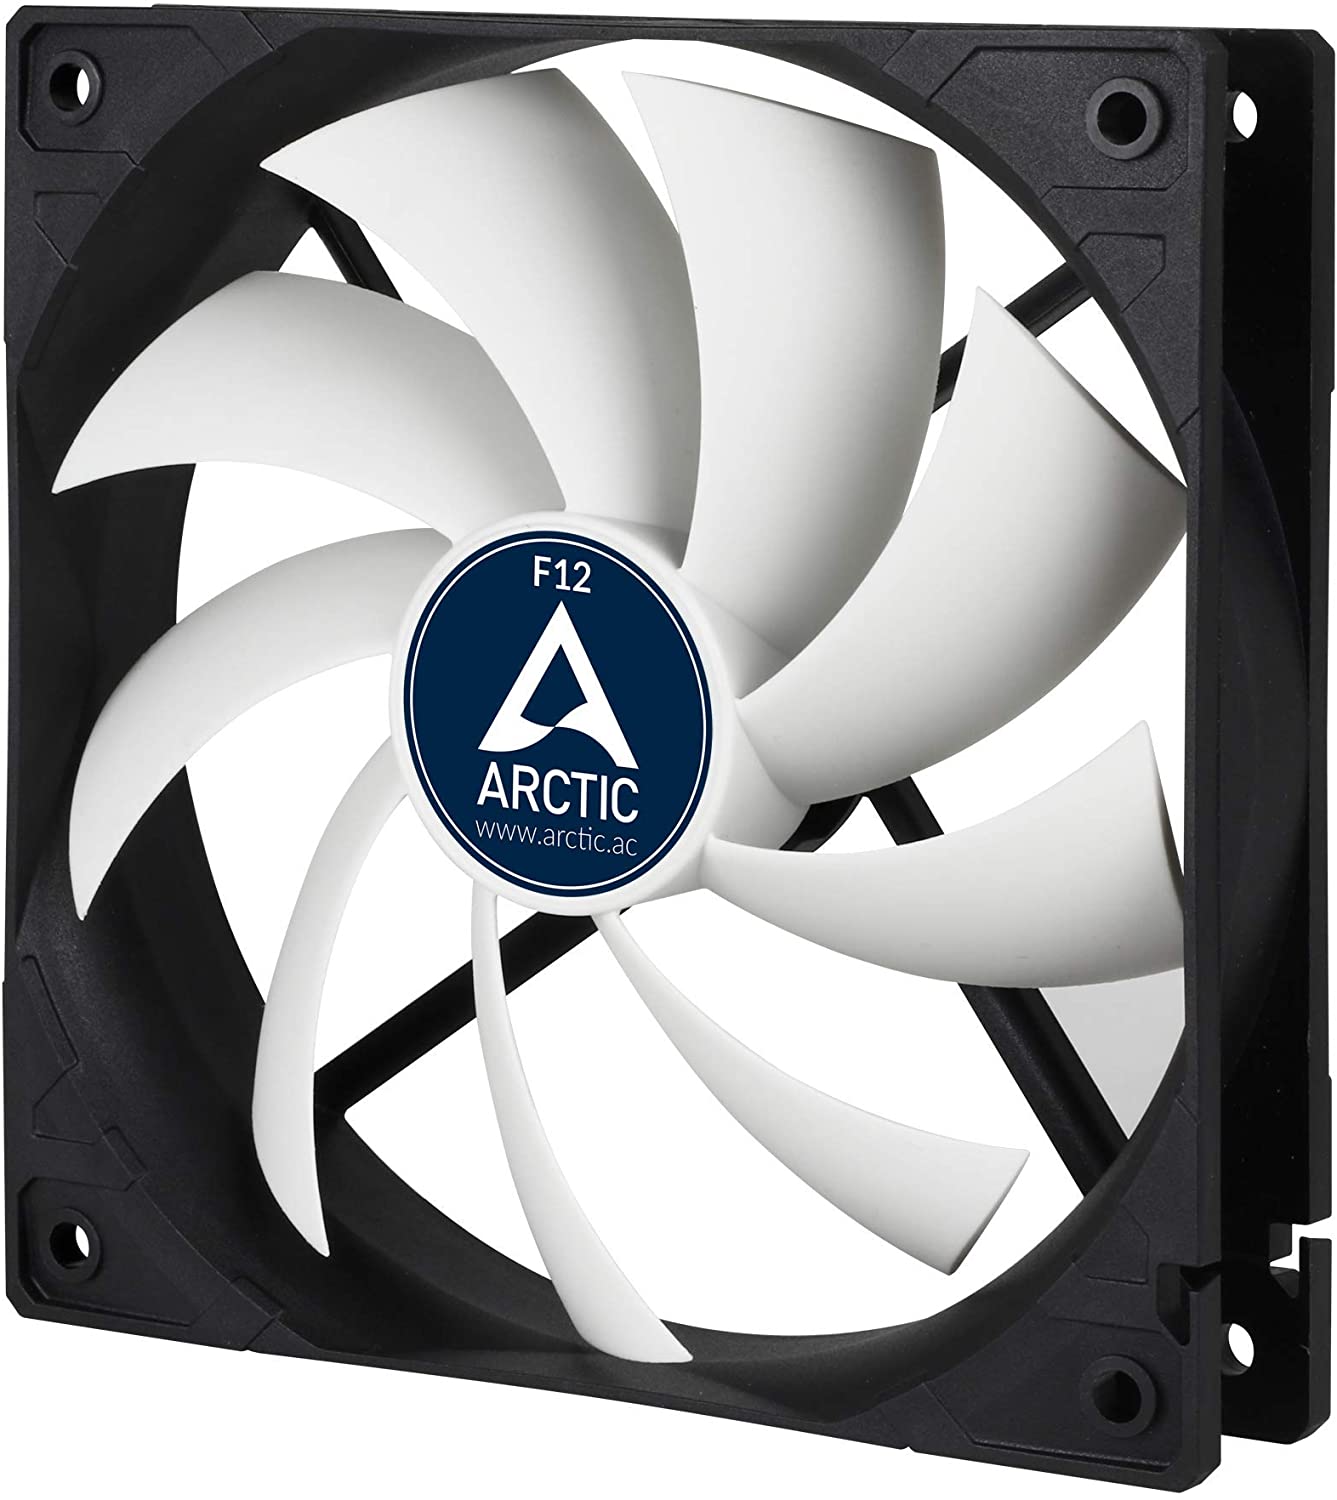 This is still the best PC case fan you can buy